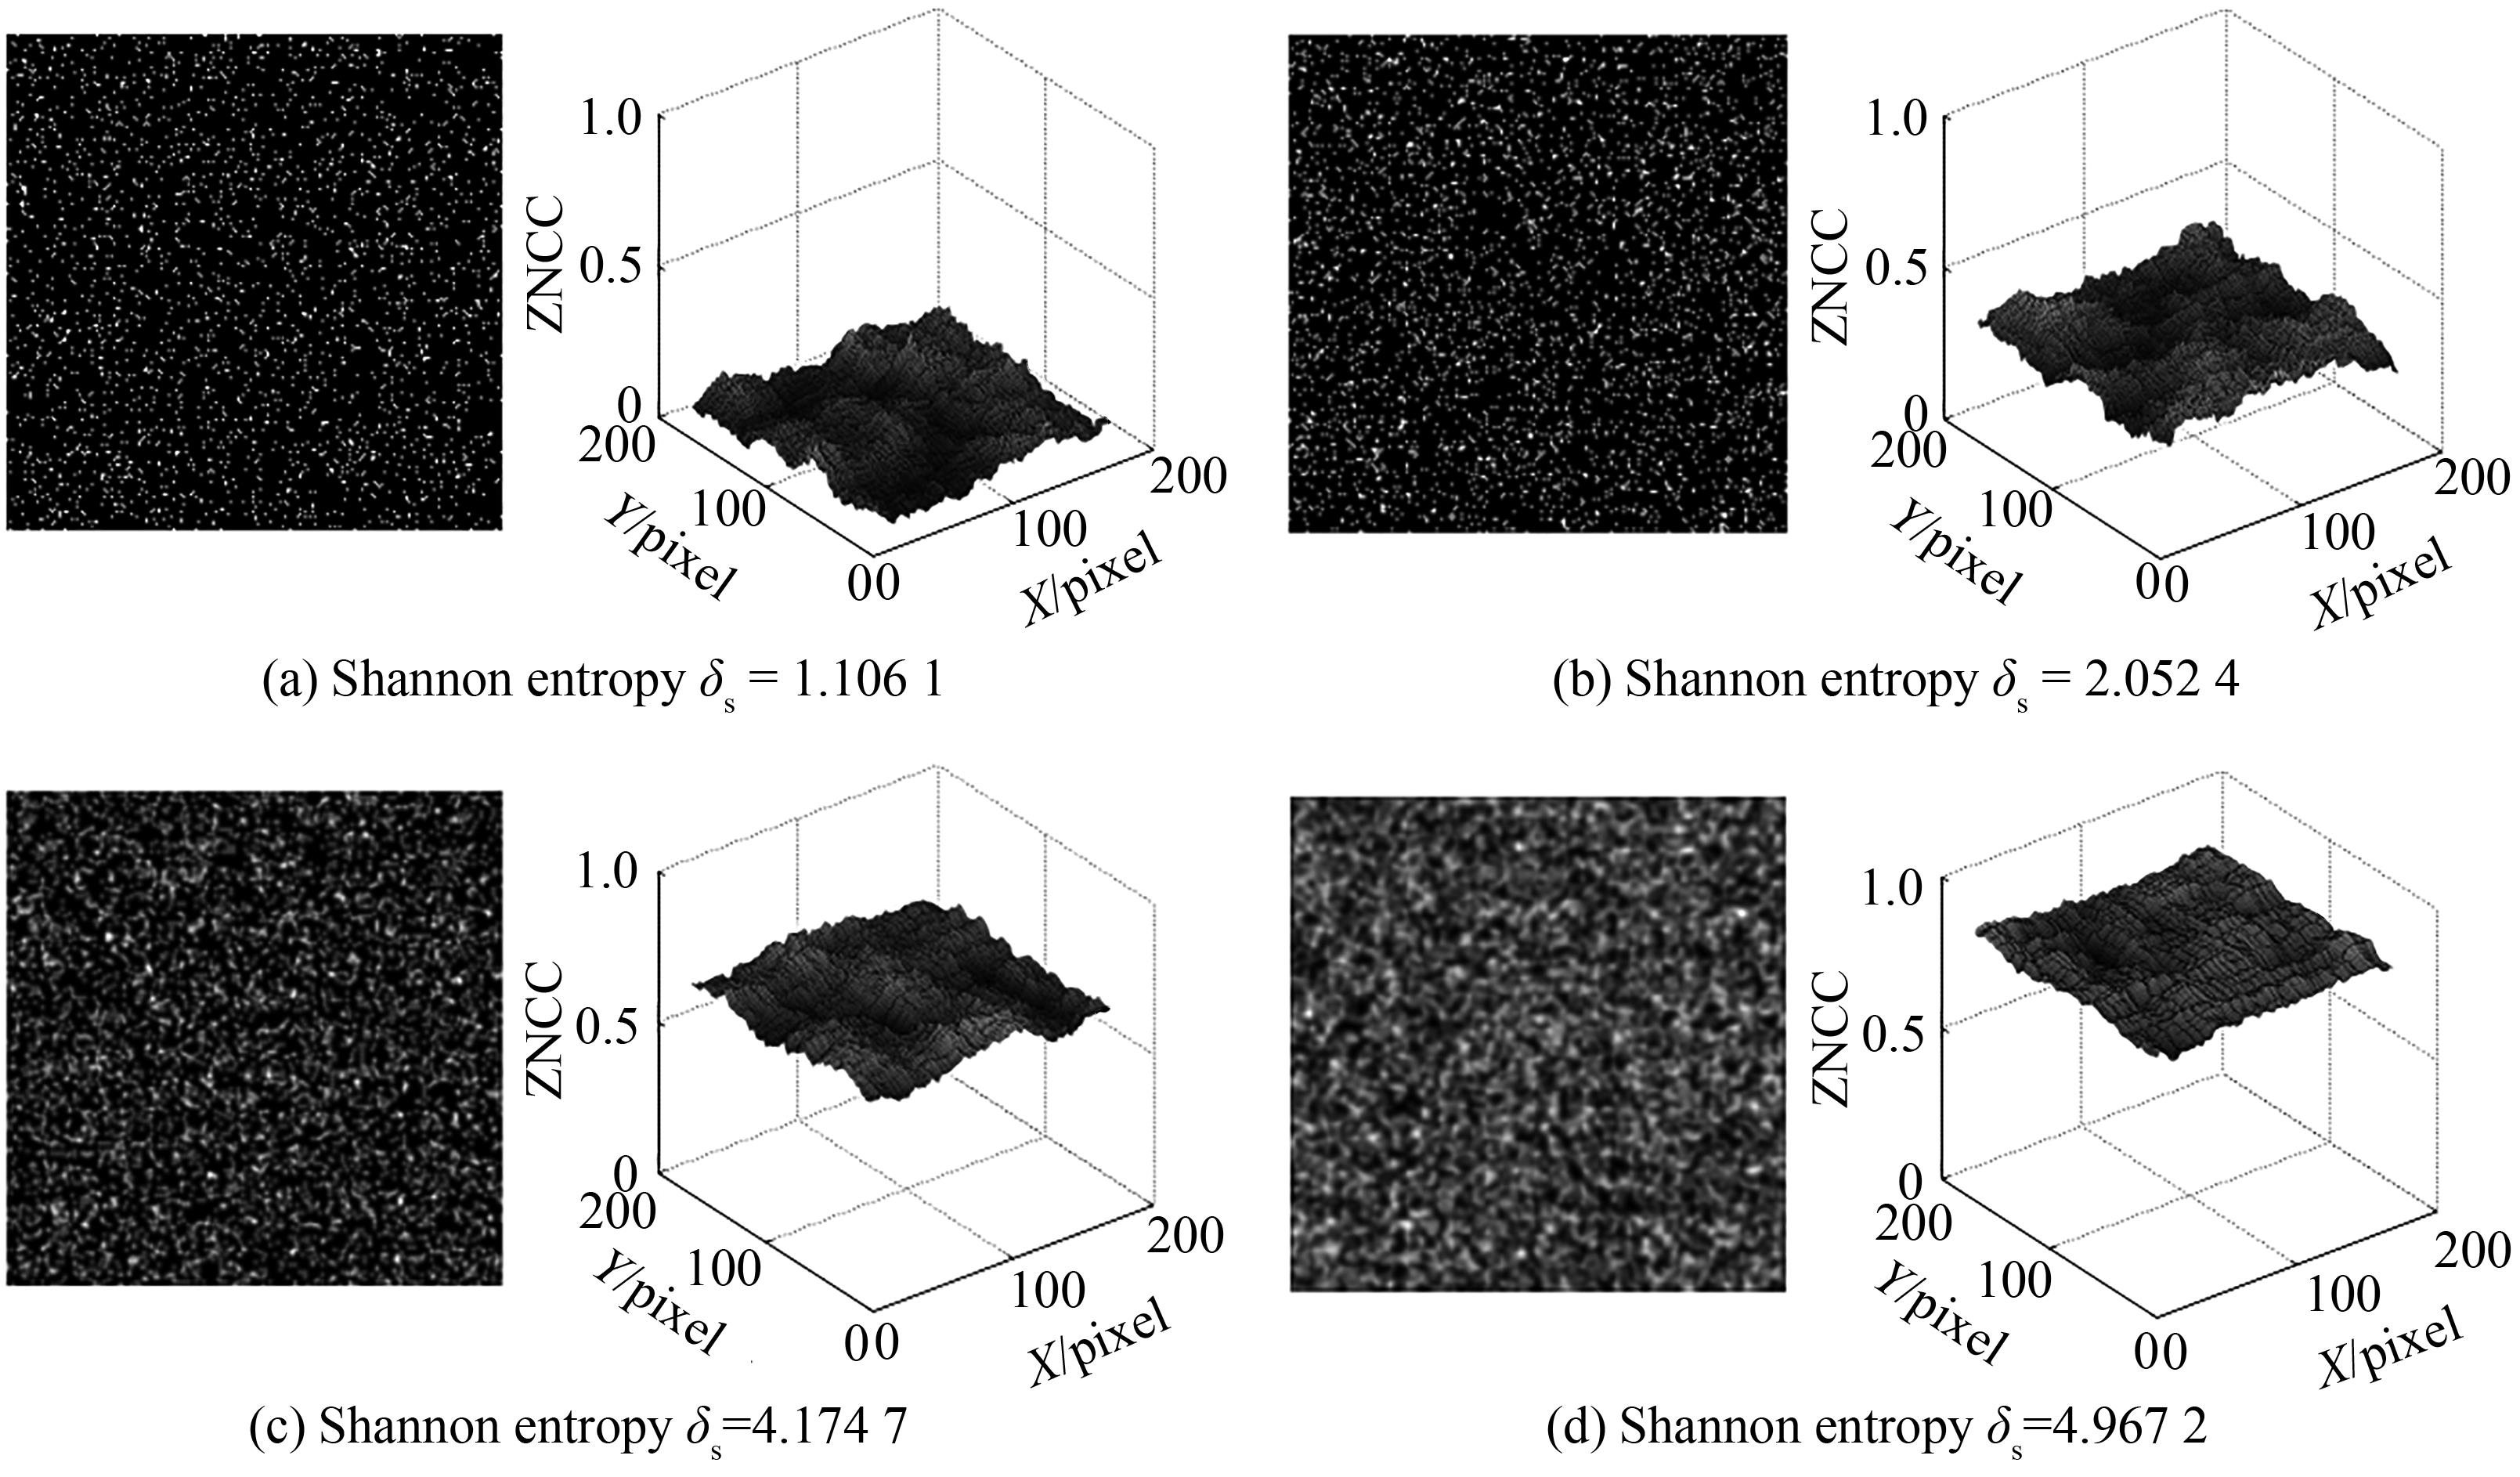 Speckle patterns and distribution of ZNCC scores between adjacent subsets for different Shannon entropy